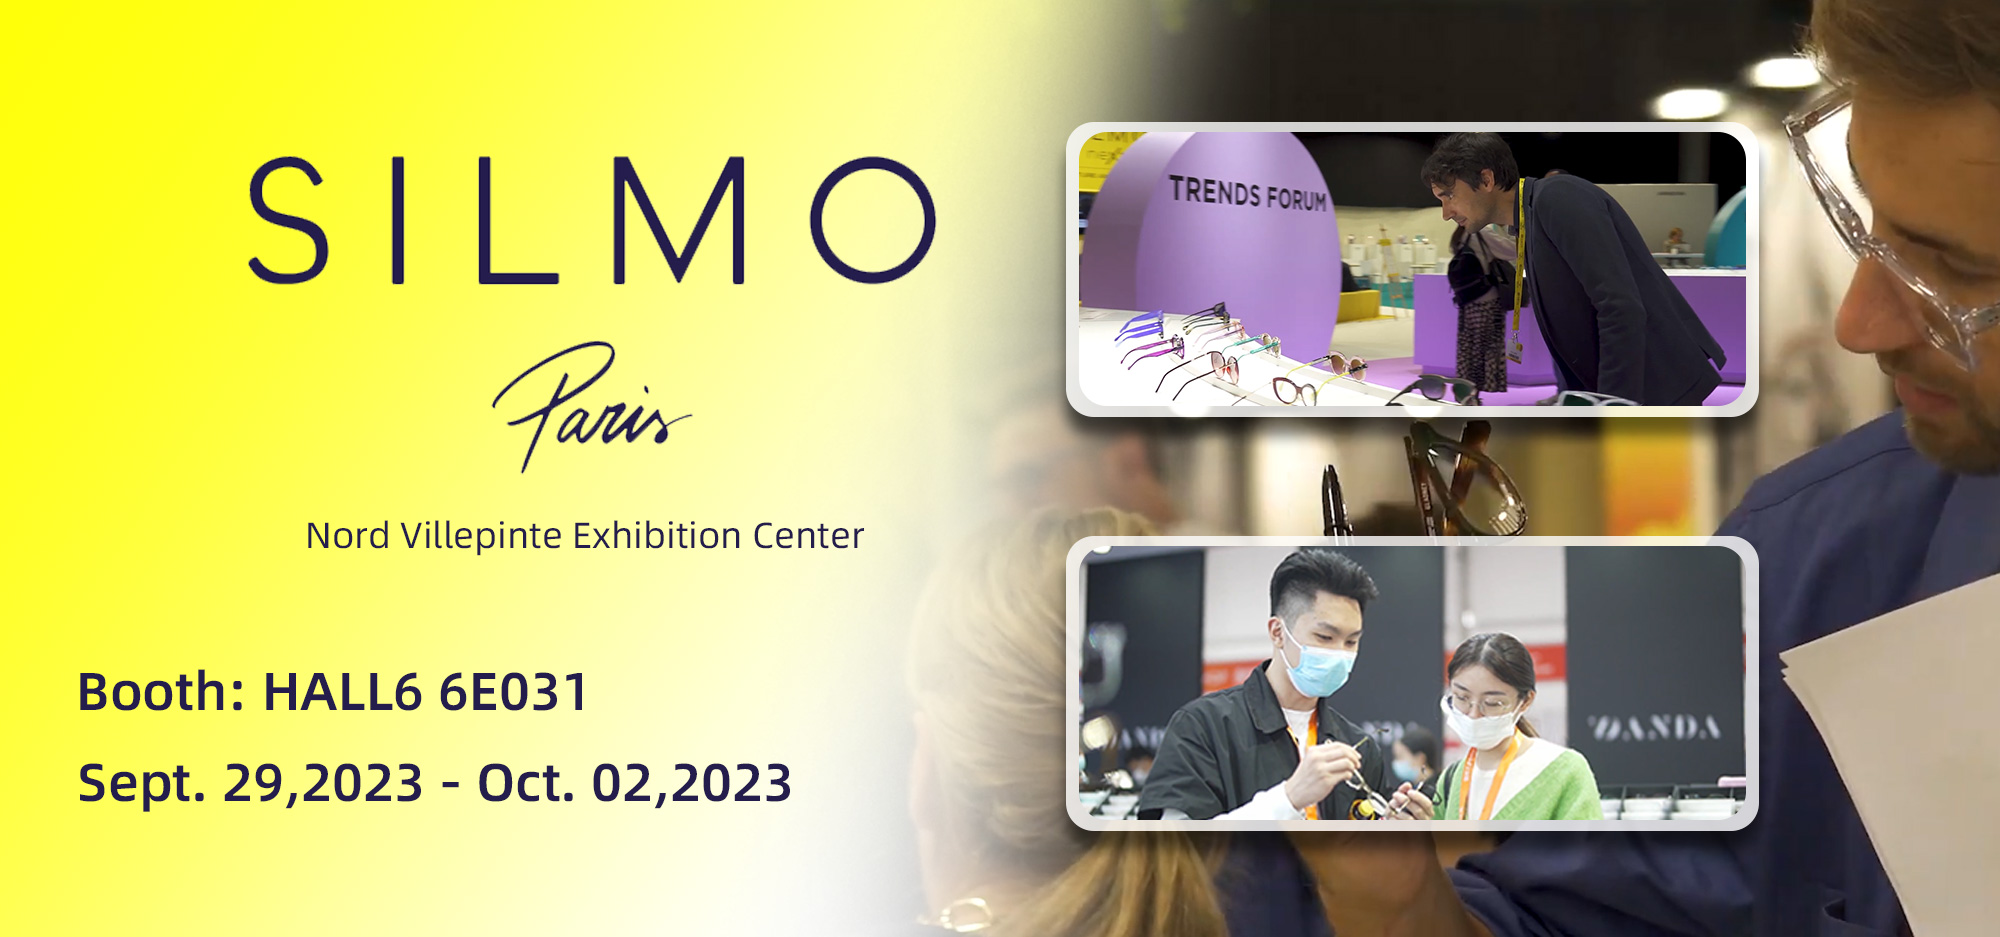 Wanda Glasses is going to attend SILMO fair, welcome to check styles at our booth.